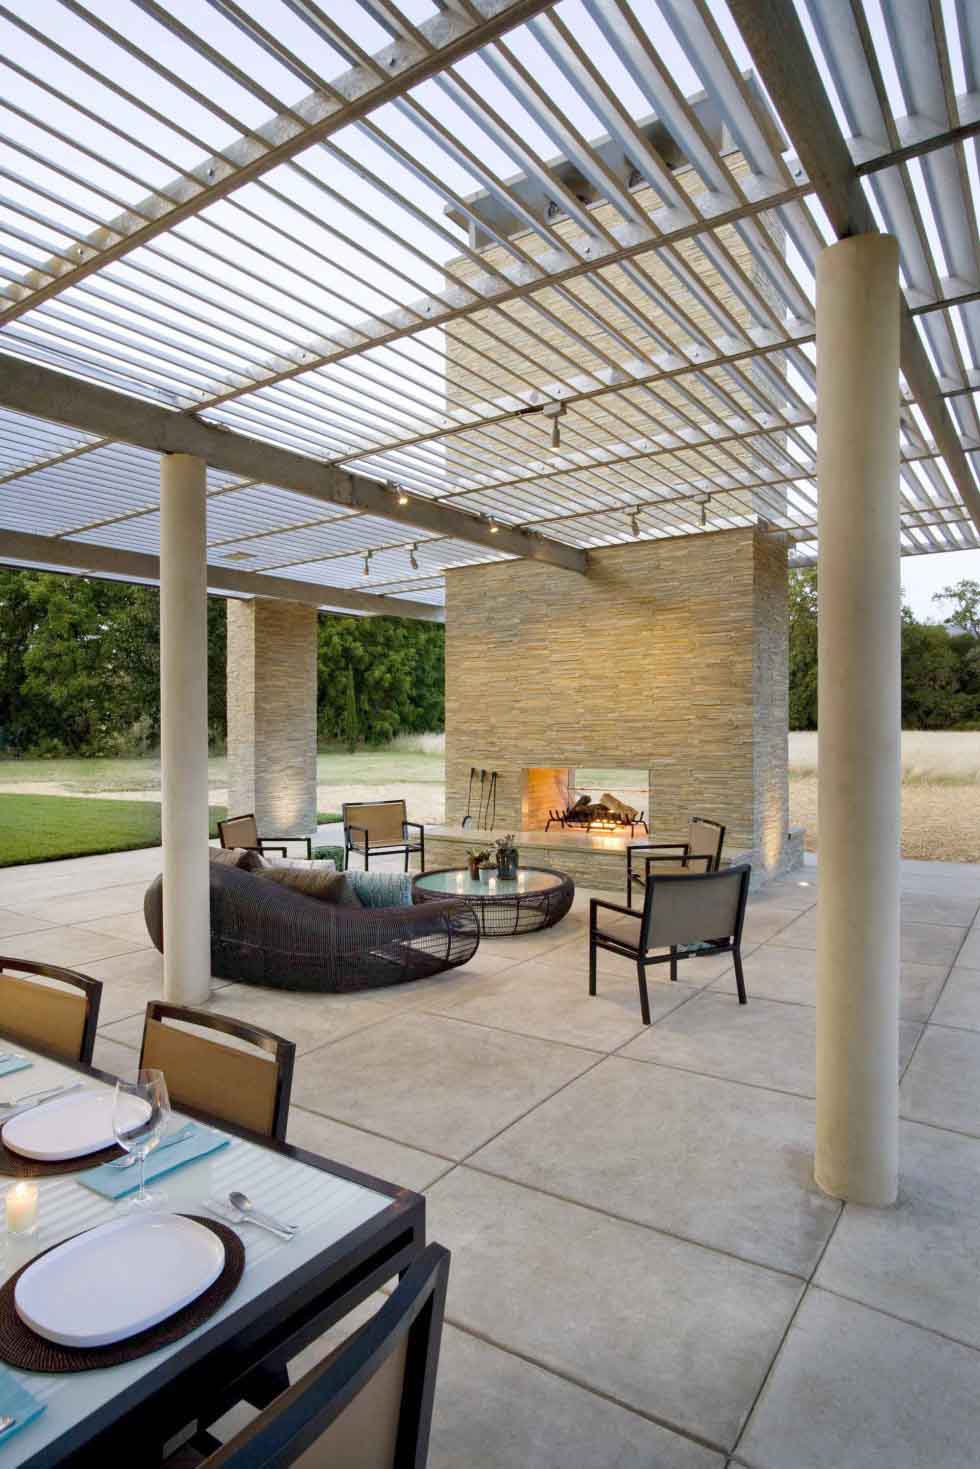 Concrete Flooring Finish In Outdoor Home Living Area